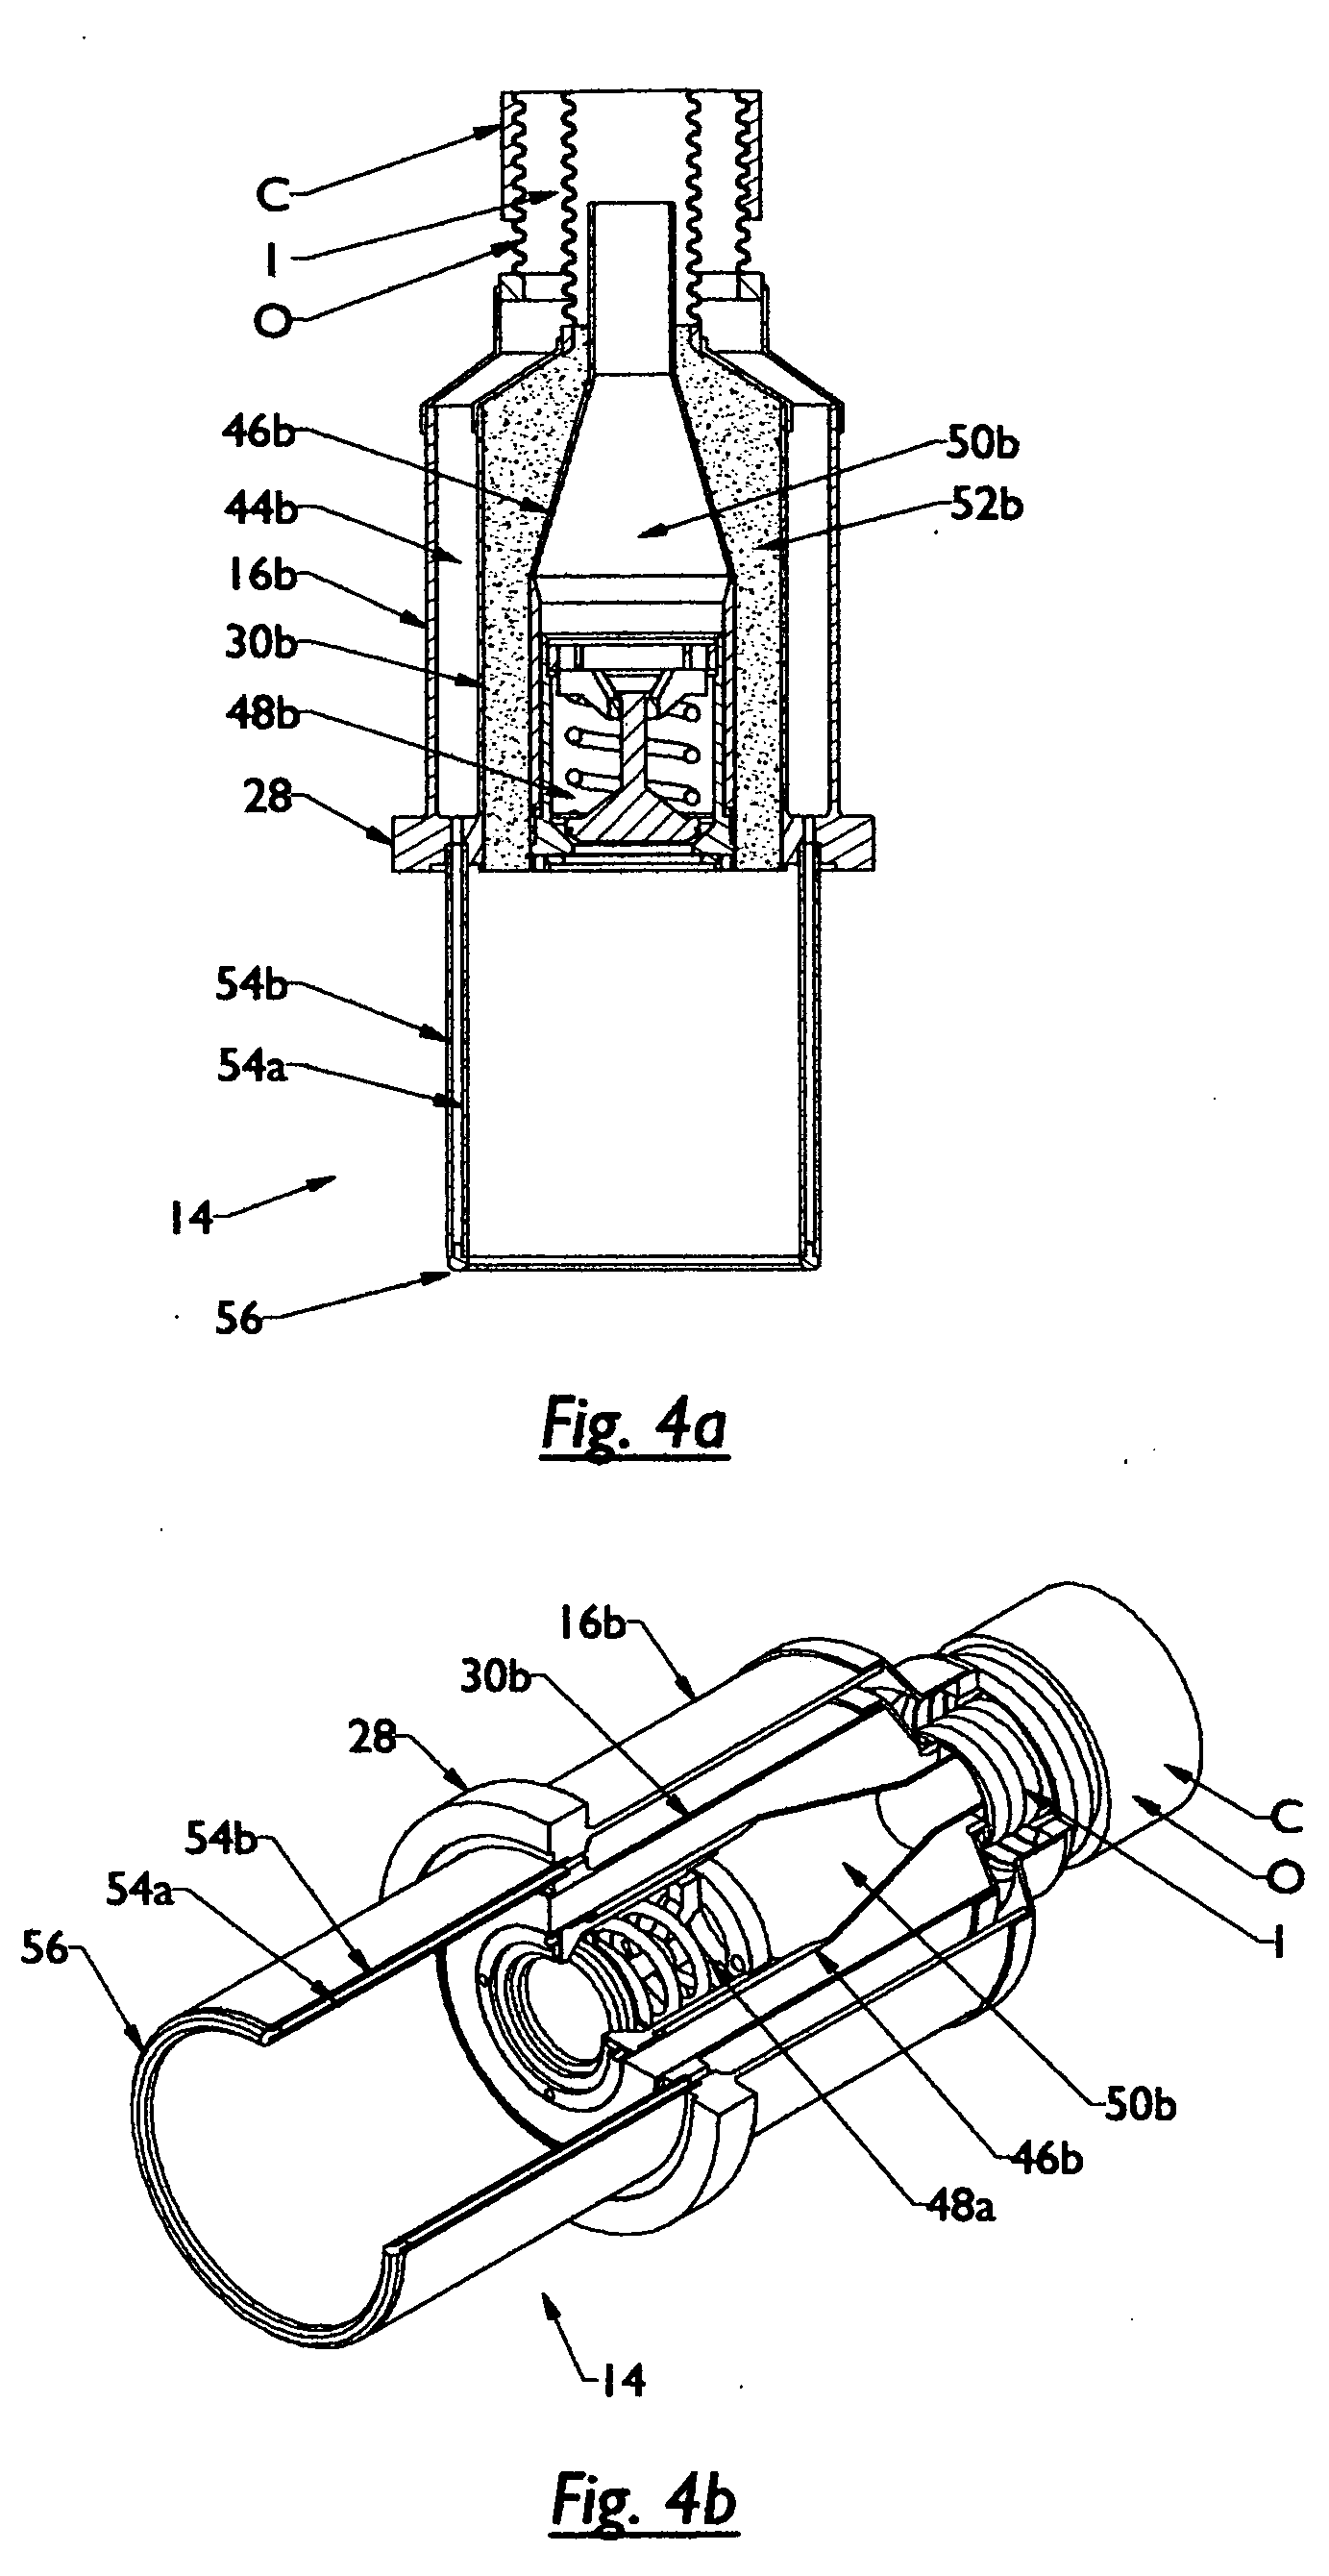 System quick disconnect termination or connection for cryogenic transfer lines